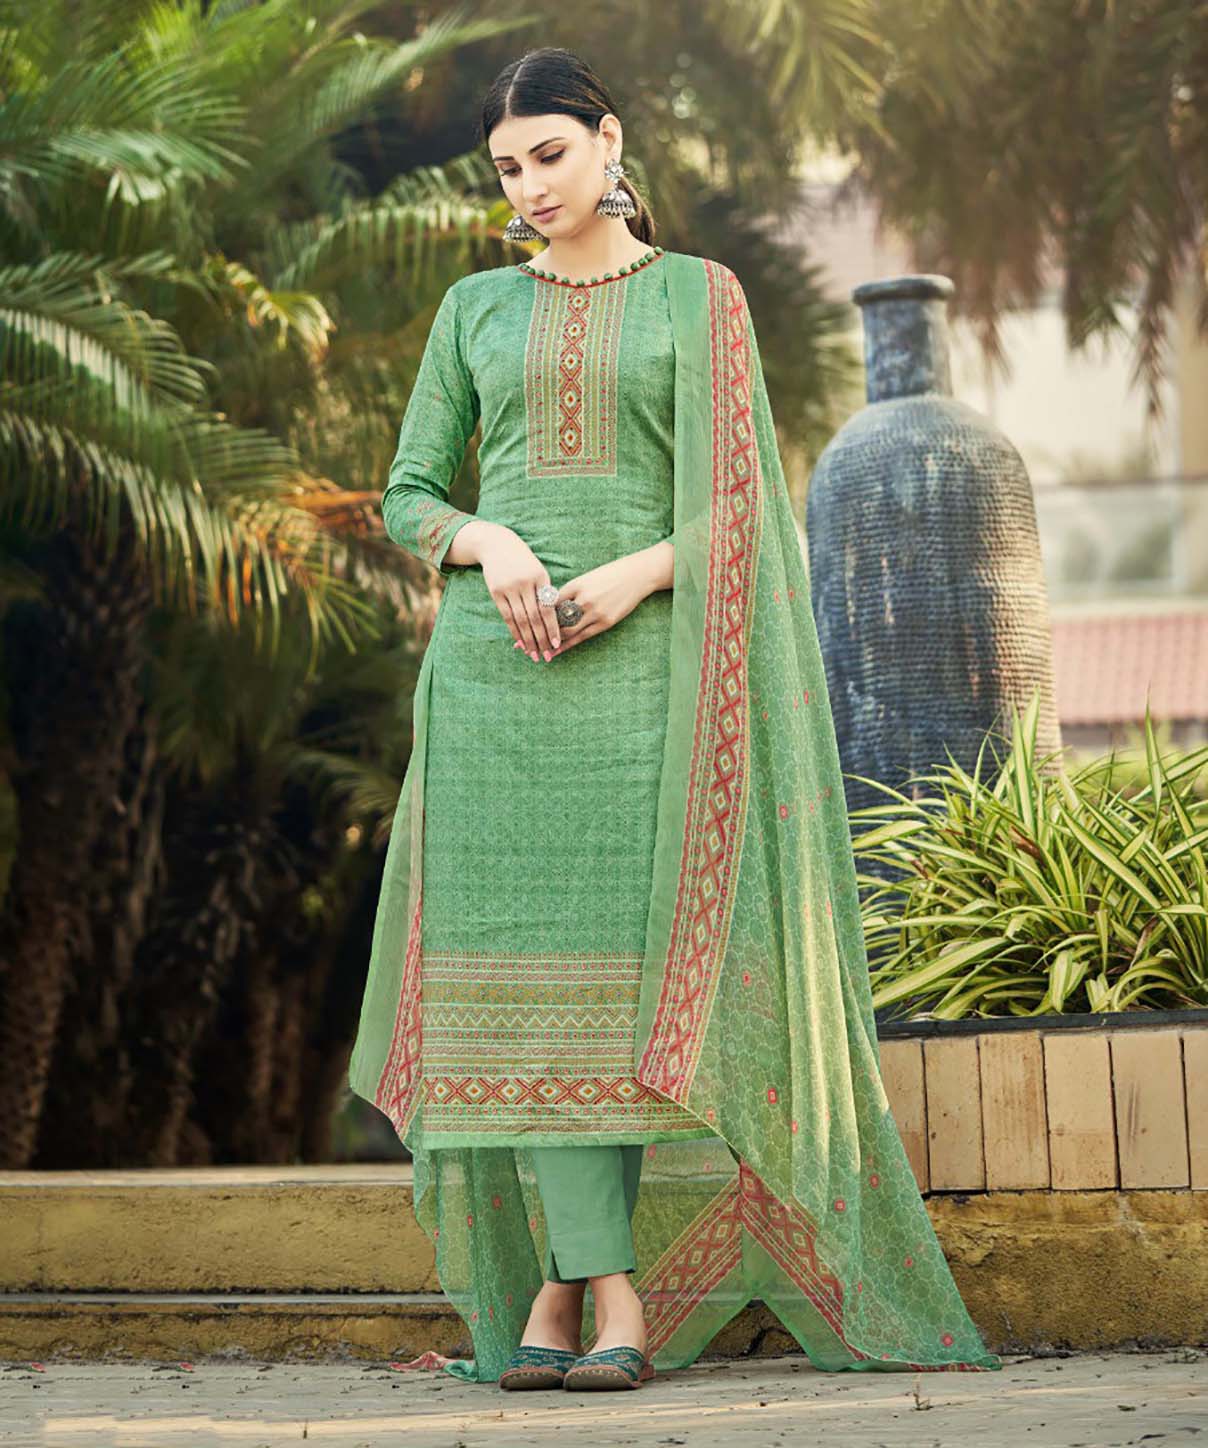 Pure Cotton Unstitched Green Salwar Suits Material With Chiffon Dupatta - Stilento